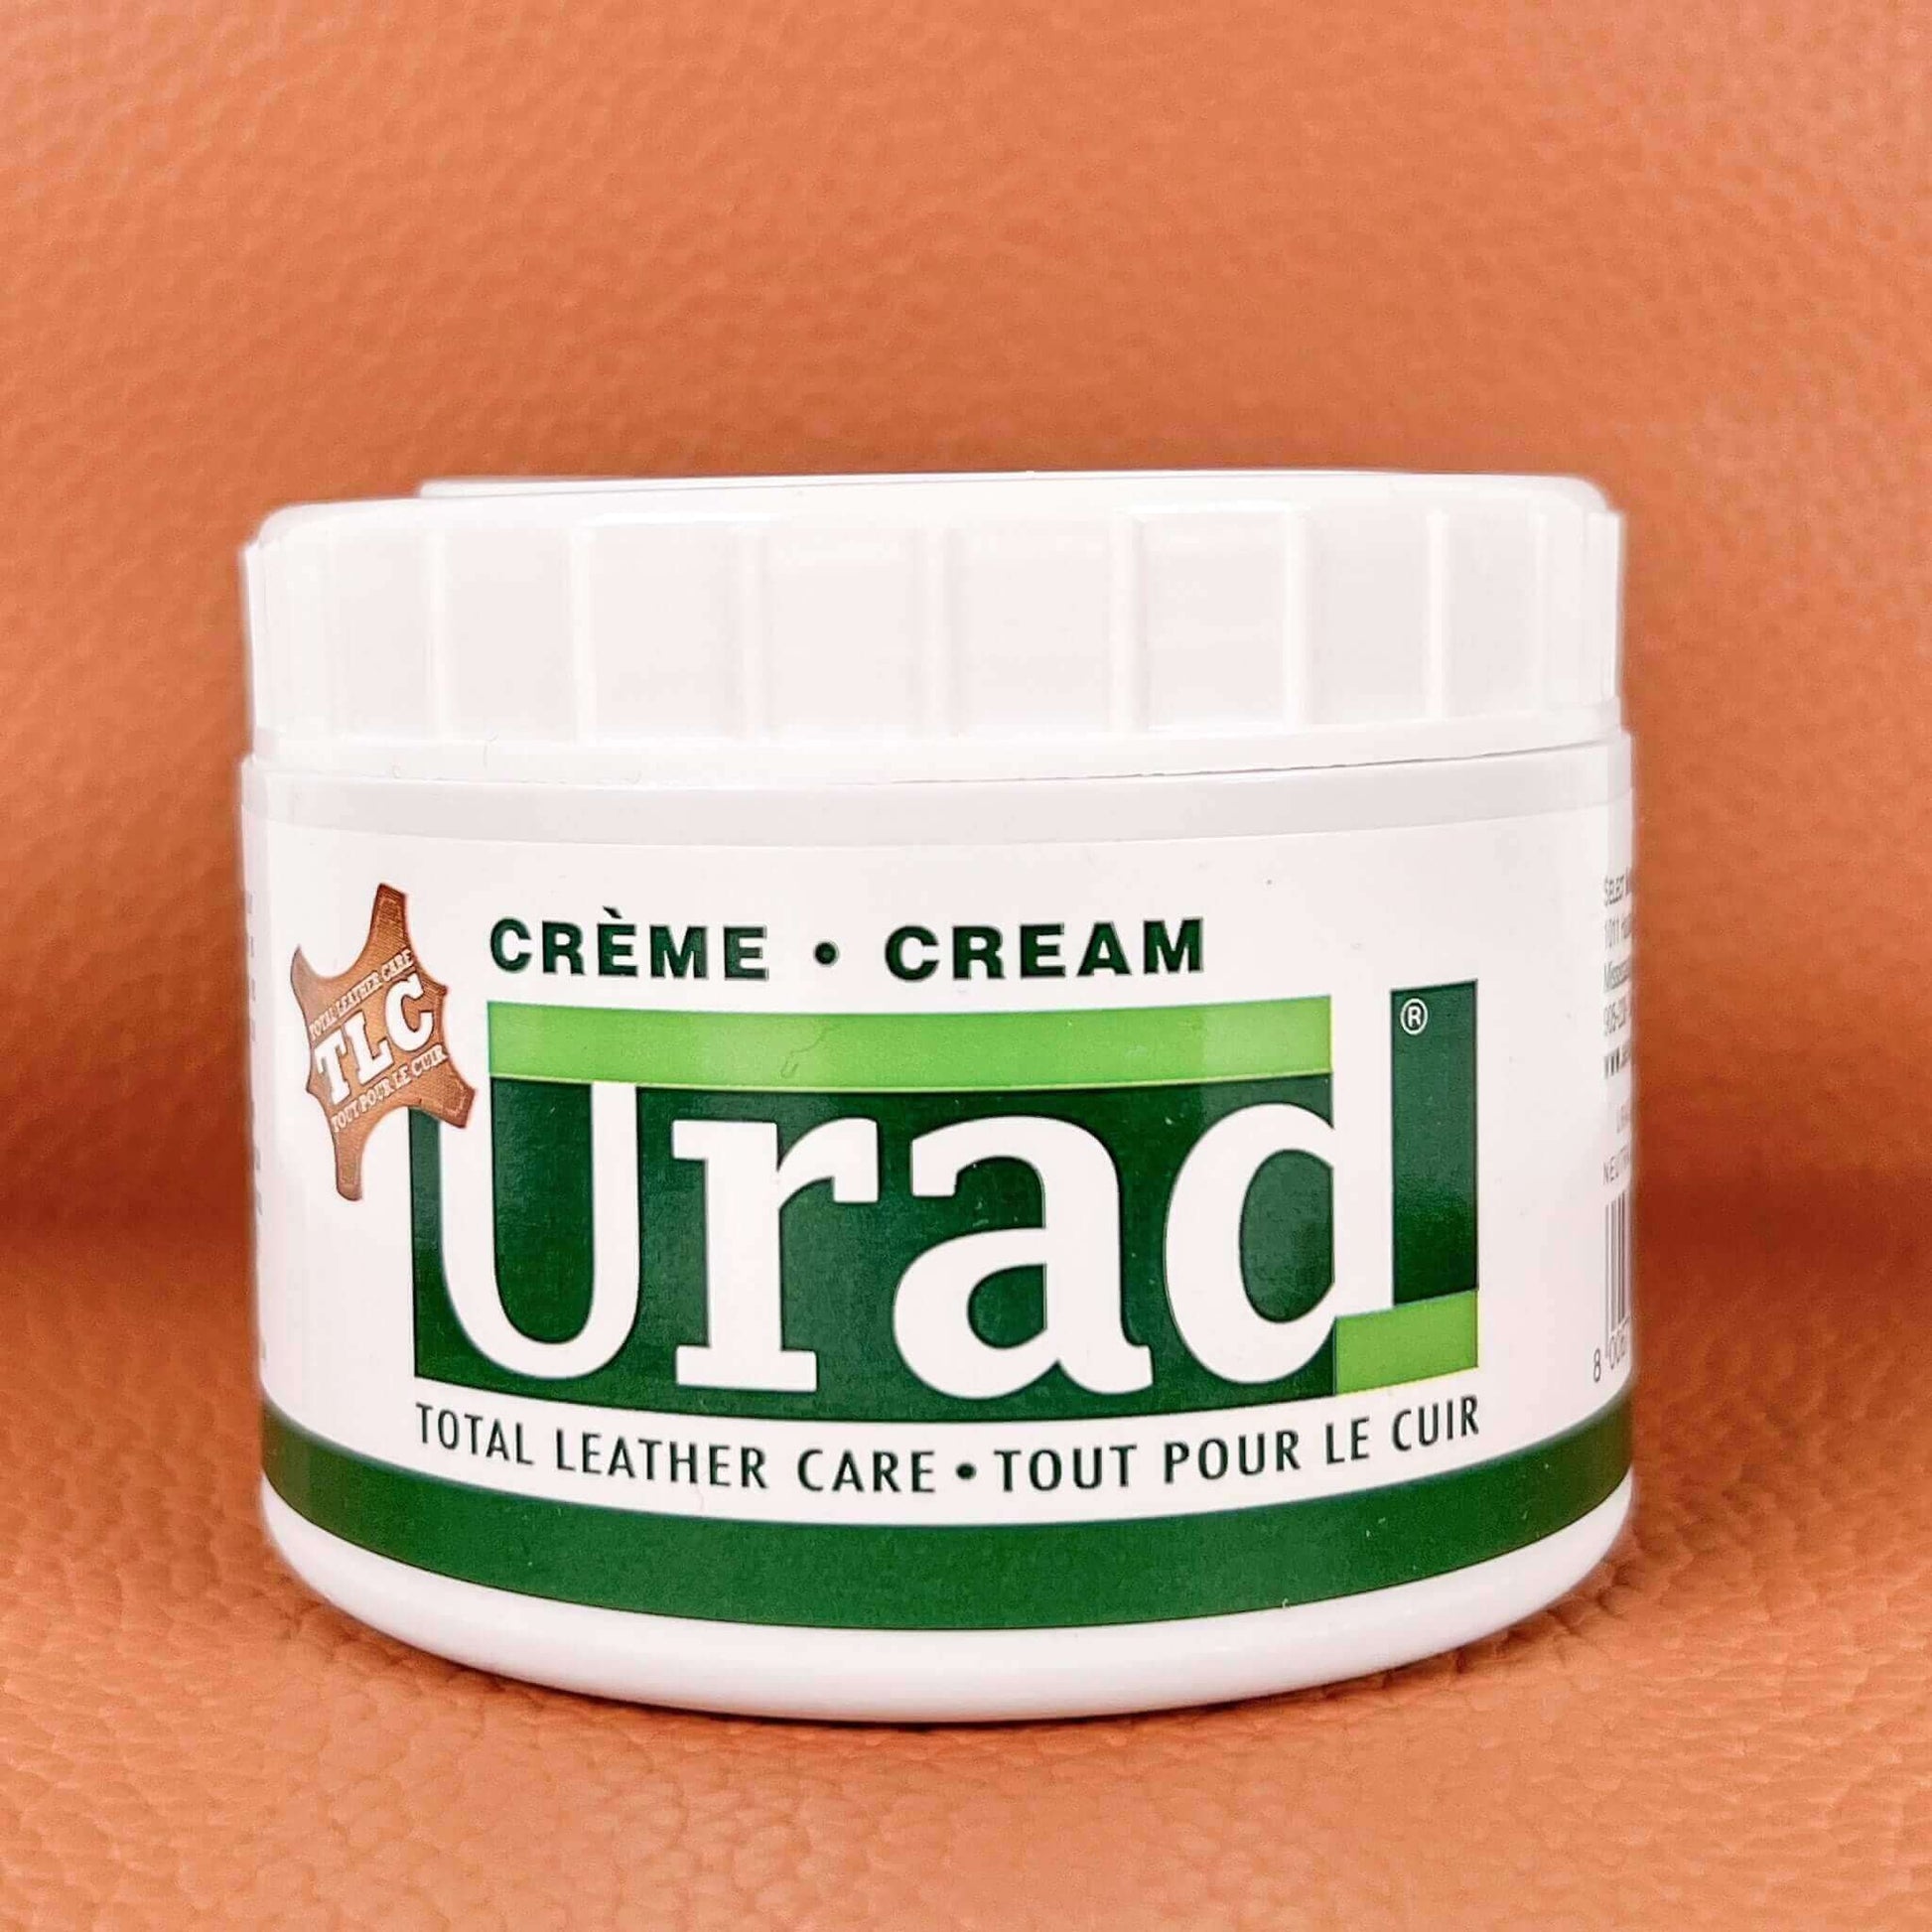 Neutral Urad leather conditioner is an excellent choice for white leather care, as it can be used on any color leather without causing discoloration or staining. Its lanolin-based formula provides superior conditioning and nourishment to the leather fiber